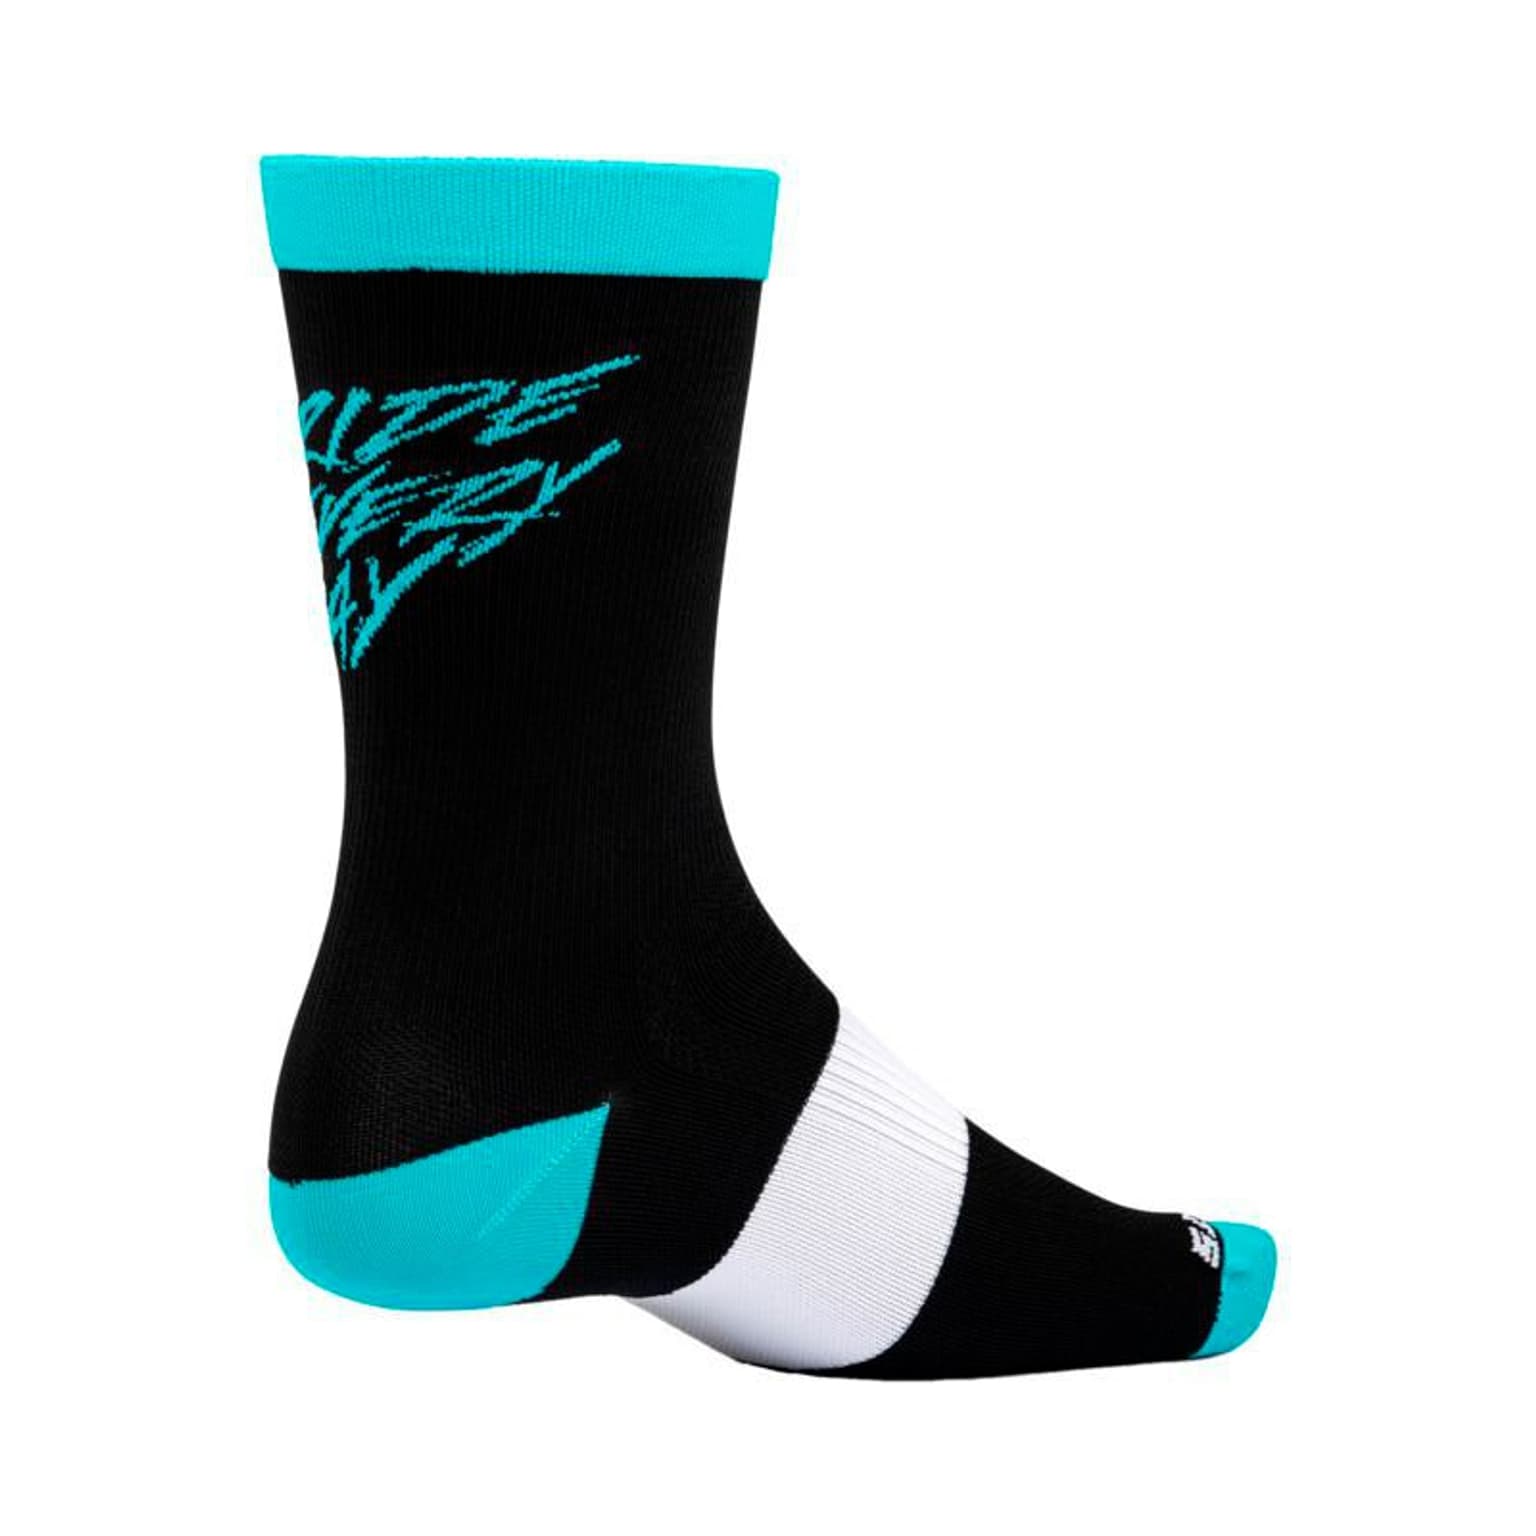 Ride Concepts Ride Concepts Ride Every Day Synthetic Chaussettes de vélo turquoise 1